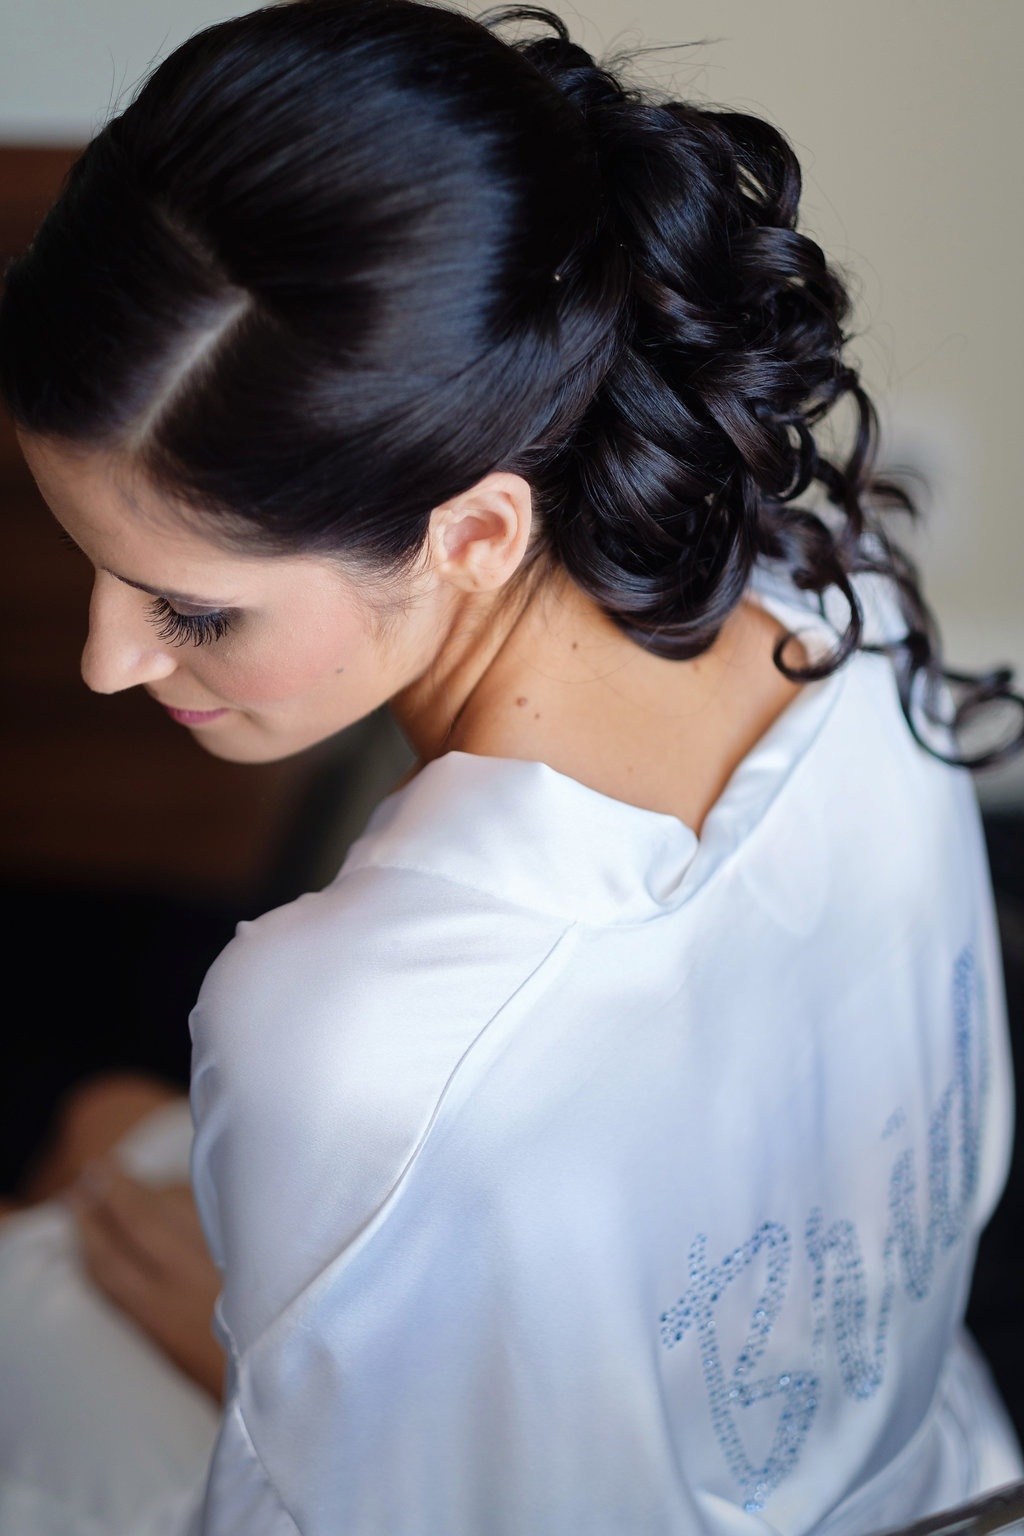 Black Haired Bride Getting Ready Portrait Curled Hair Updo